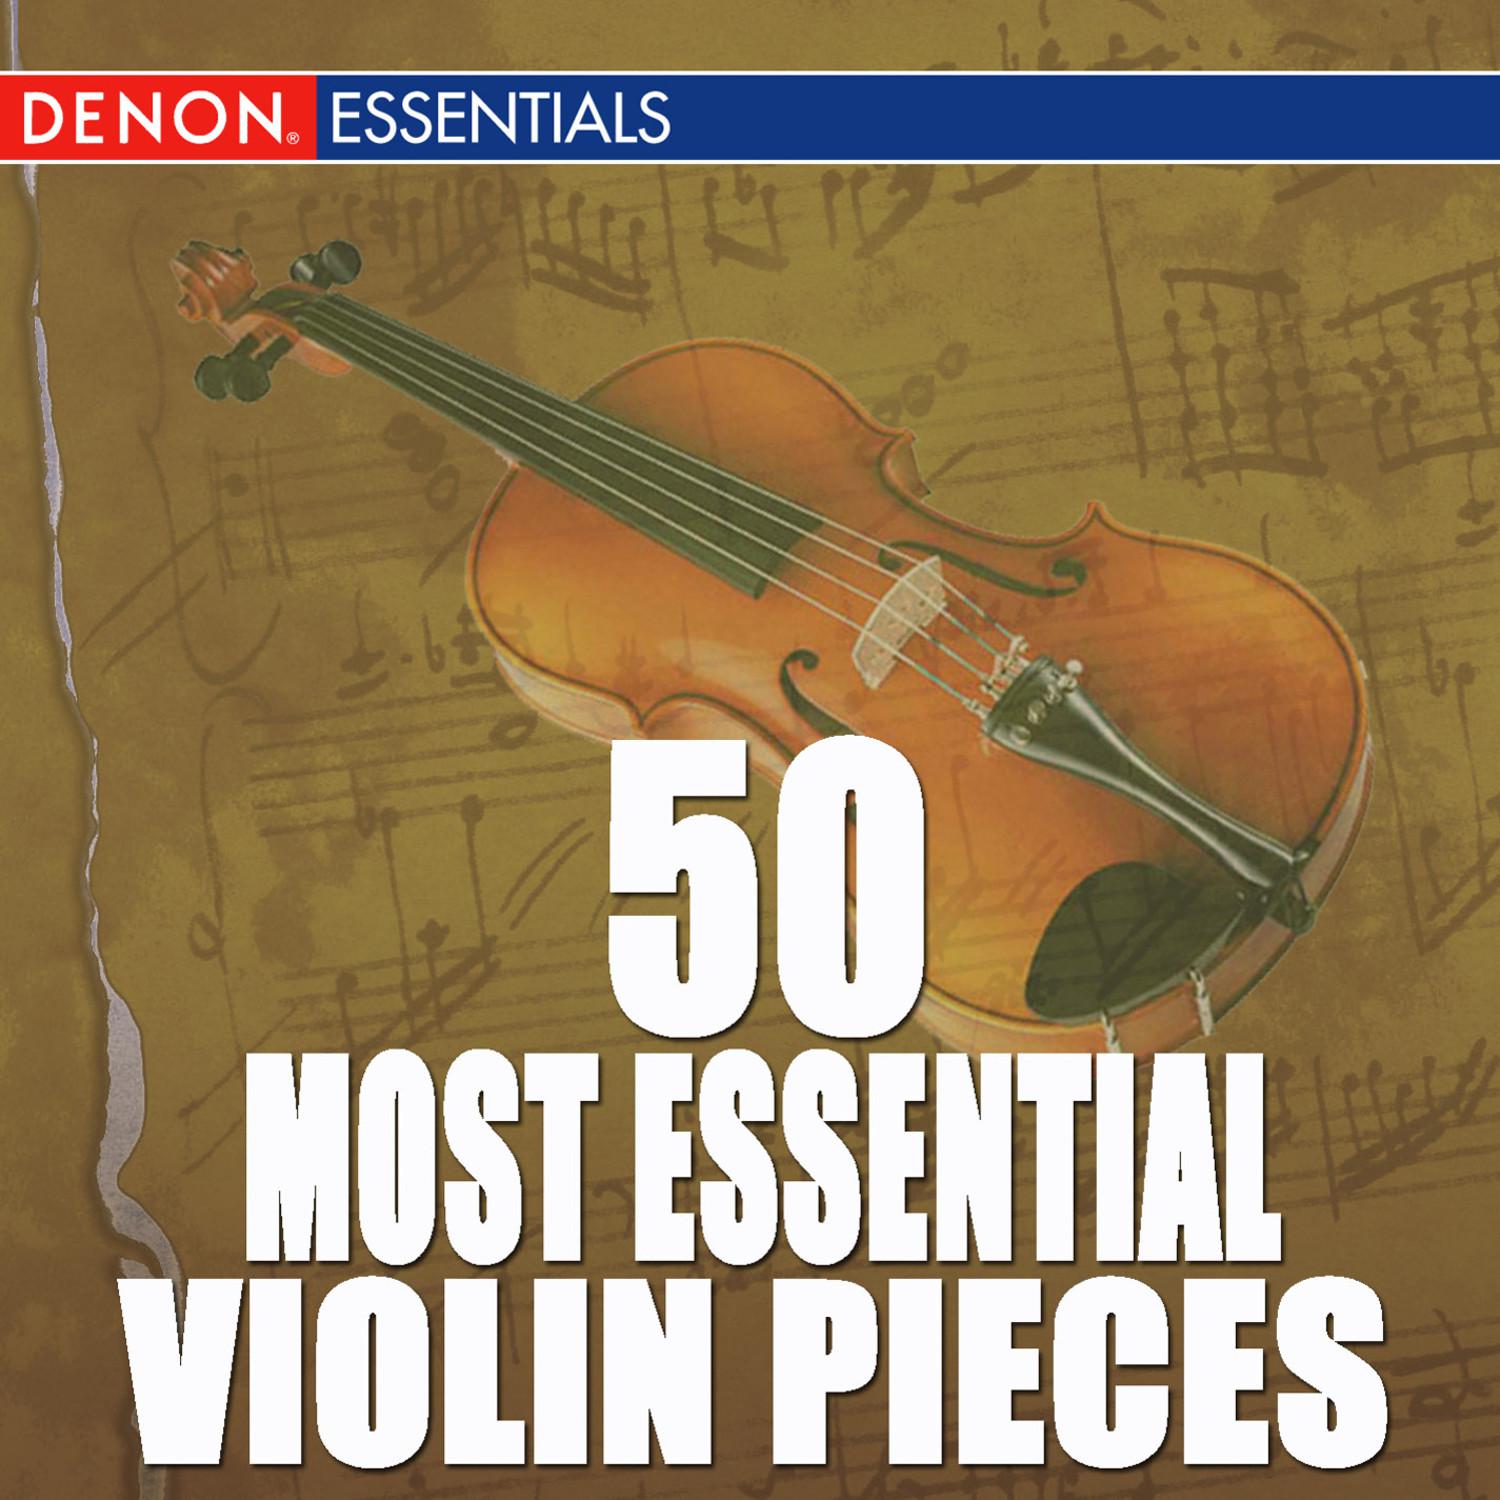 24 Caprices for Violin, Op. 1: No. 13 in B-Flat